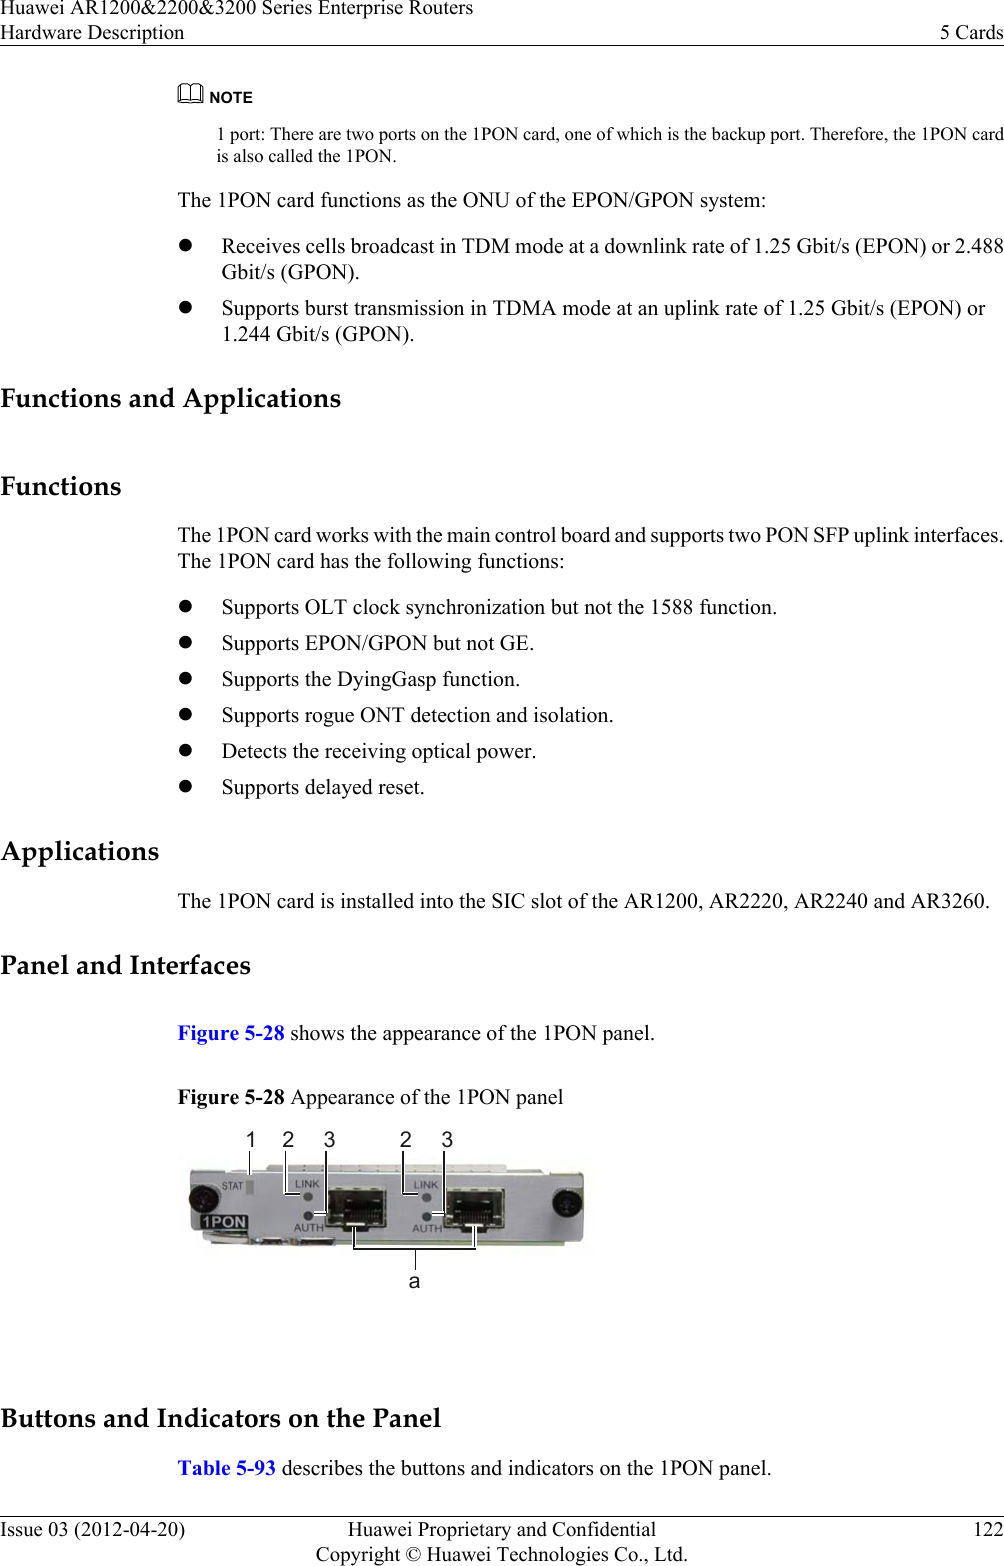 NOTE1 port: There are two ports on the 1PON card, one of which is the backup port. Therefore, the 1PON cardis also called the 1PON.The 1PON card functions as the ONU of the EPON/GPON system:lReceives cells broadcast in TDM mode at a downlink rate of 1.25 Gbit/s (EPON) or 2.488Gbit/s (GPON).lSupports burst transmission in TDMA mode at an uplink rate of 1.25 Gbit/s (EPON) or1.244 Gbit/s (GPON).Functions and ApplicationsFunctionsThe 1PON card works with the main control board and supports two PON SFP uplink interfaces.The 1PON card has the following functions:lSupports OLT clock synchronization but not the 1588 function.lSupports EPON/GPON but not GE.lSupports the DyingGasp function.lSupports rogue ONT detection and isolation.lDetects the receiving optical power.lSupports delayed reset.ApplicationsThe 1PON card is installed into the SIC slot of the AR1200, AR2220, AR2240 and AR3260.Panel and InterfacesFigure 5-28 shows the appearance of the 1PON panel.Figure 5-28 Appearance of the 1PON panel1a2 3 2 3 Buttons and Indicators on the PanelTable 5-93 describes the buttons and indicators on the 1PON panel.Huawei AR1200&amp;2200&amp;3200 Series Enterprise RoutersHardware Description 5 CardsIssue 03 (2012-04-20) Huawei Proprietary and ConfidentialCopyright © Huawei Technologies Co., Ltd.122